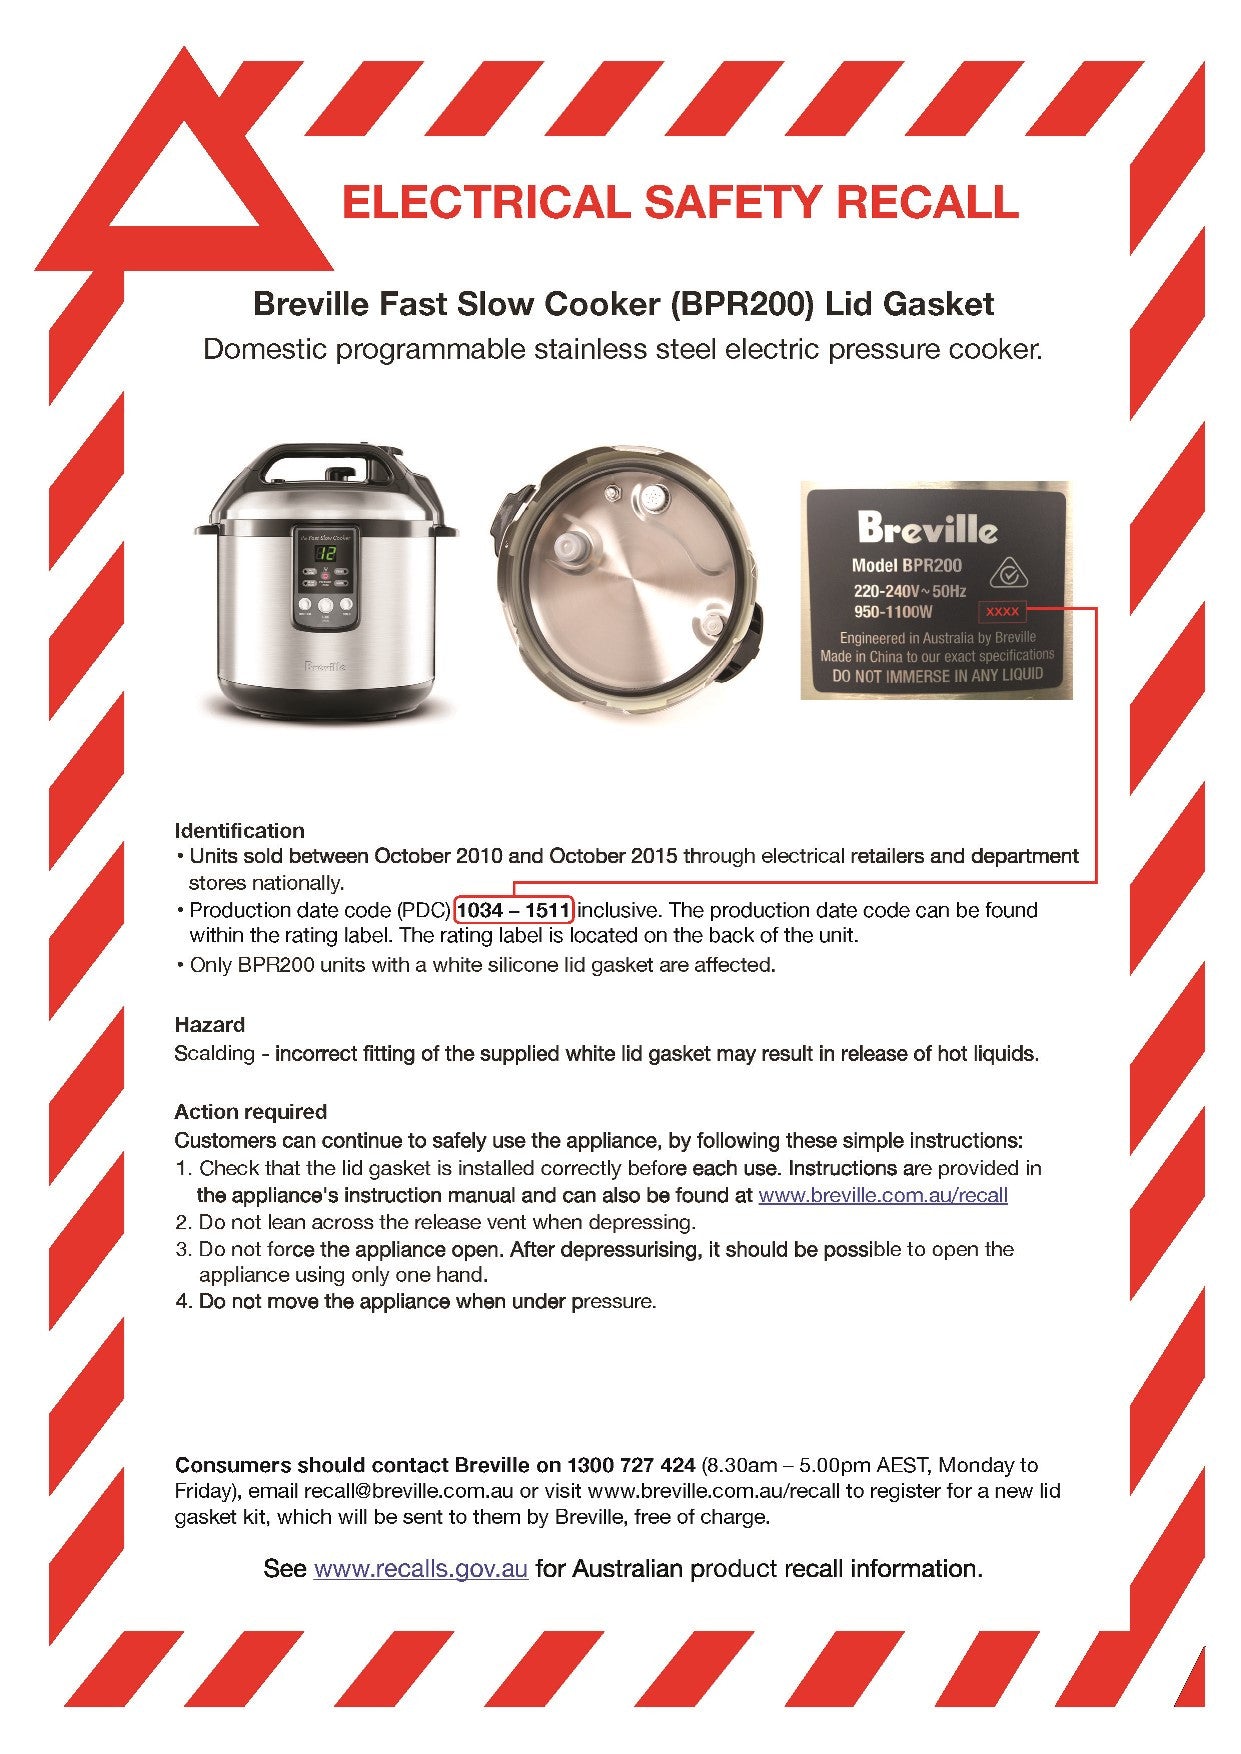 Breville Fast Slow Cooker Recall Ad